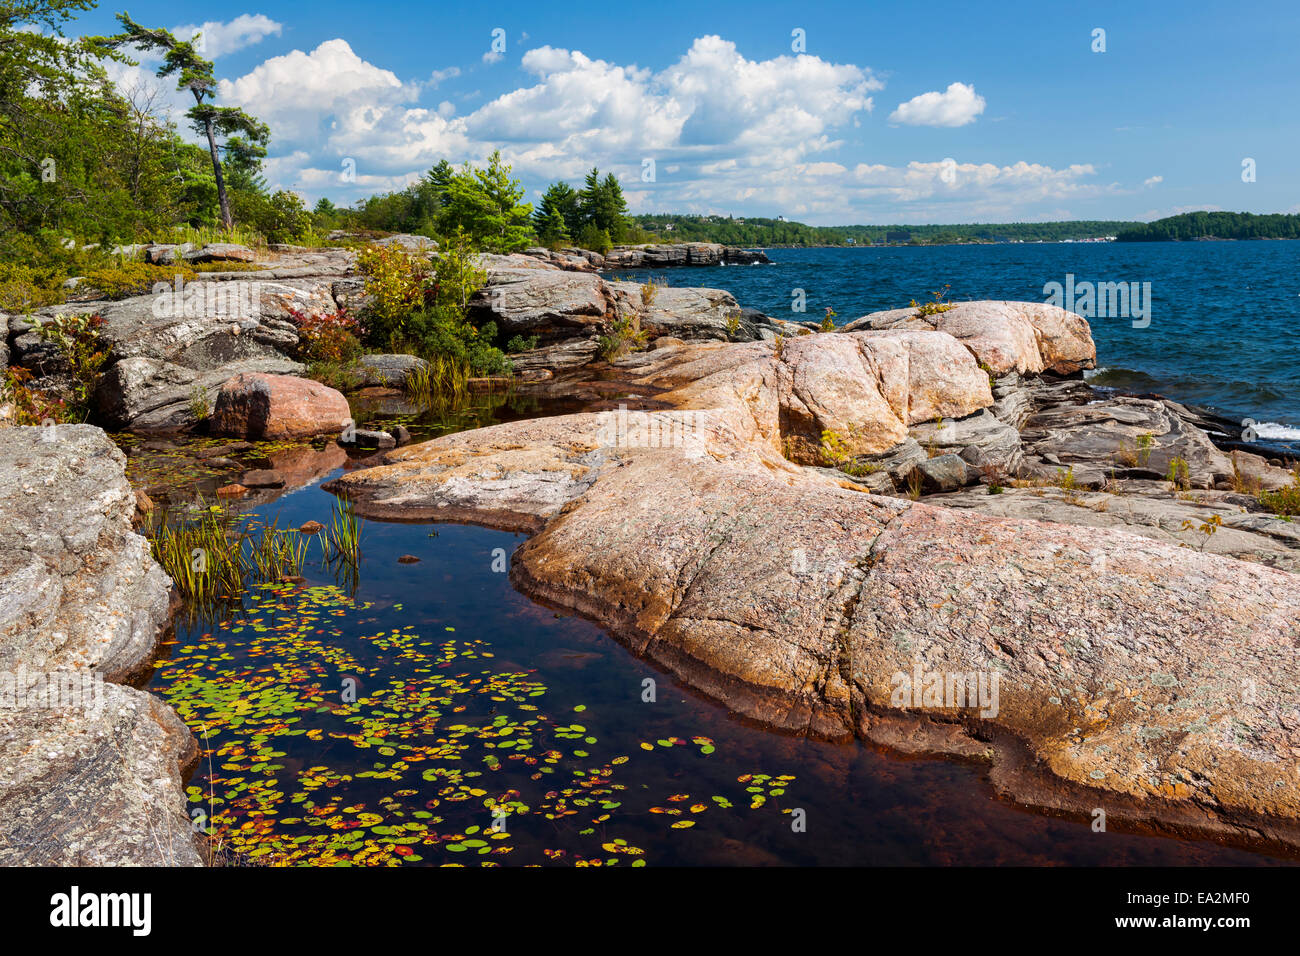 Rock formations at rocky lake shore of Georgian Bay near Parry Sound, Ontario Canada Stock Photo